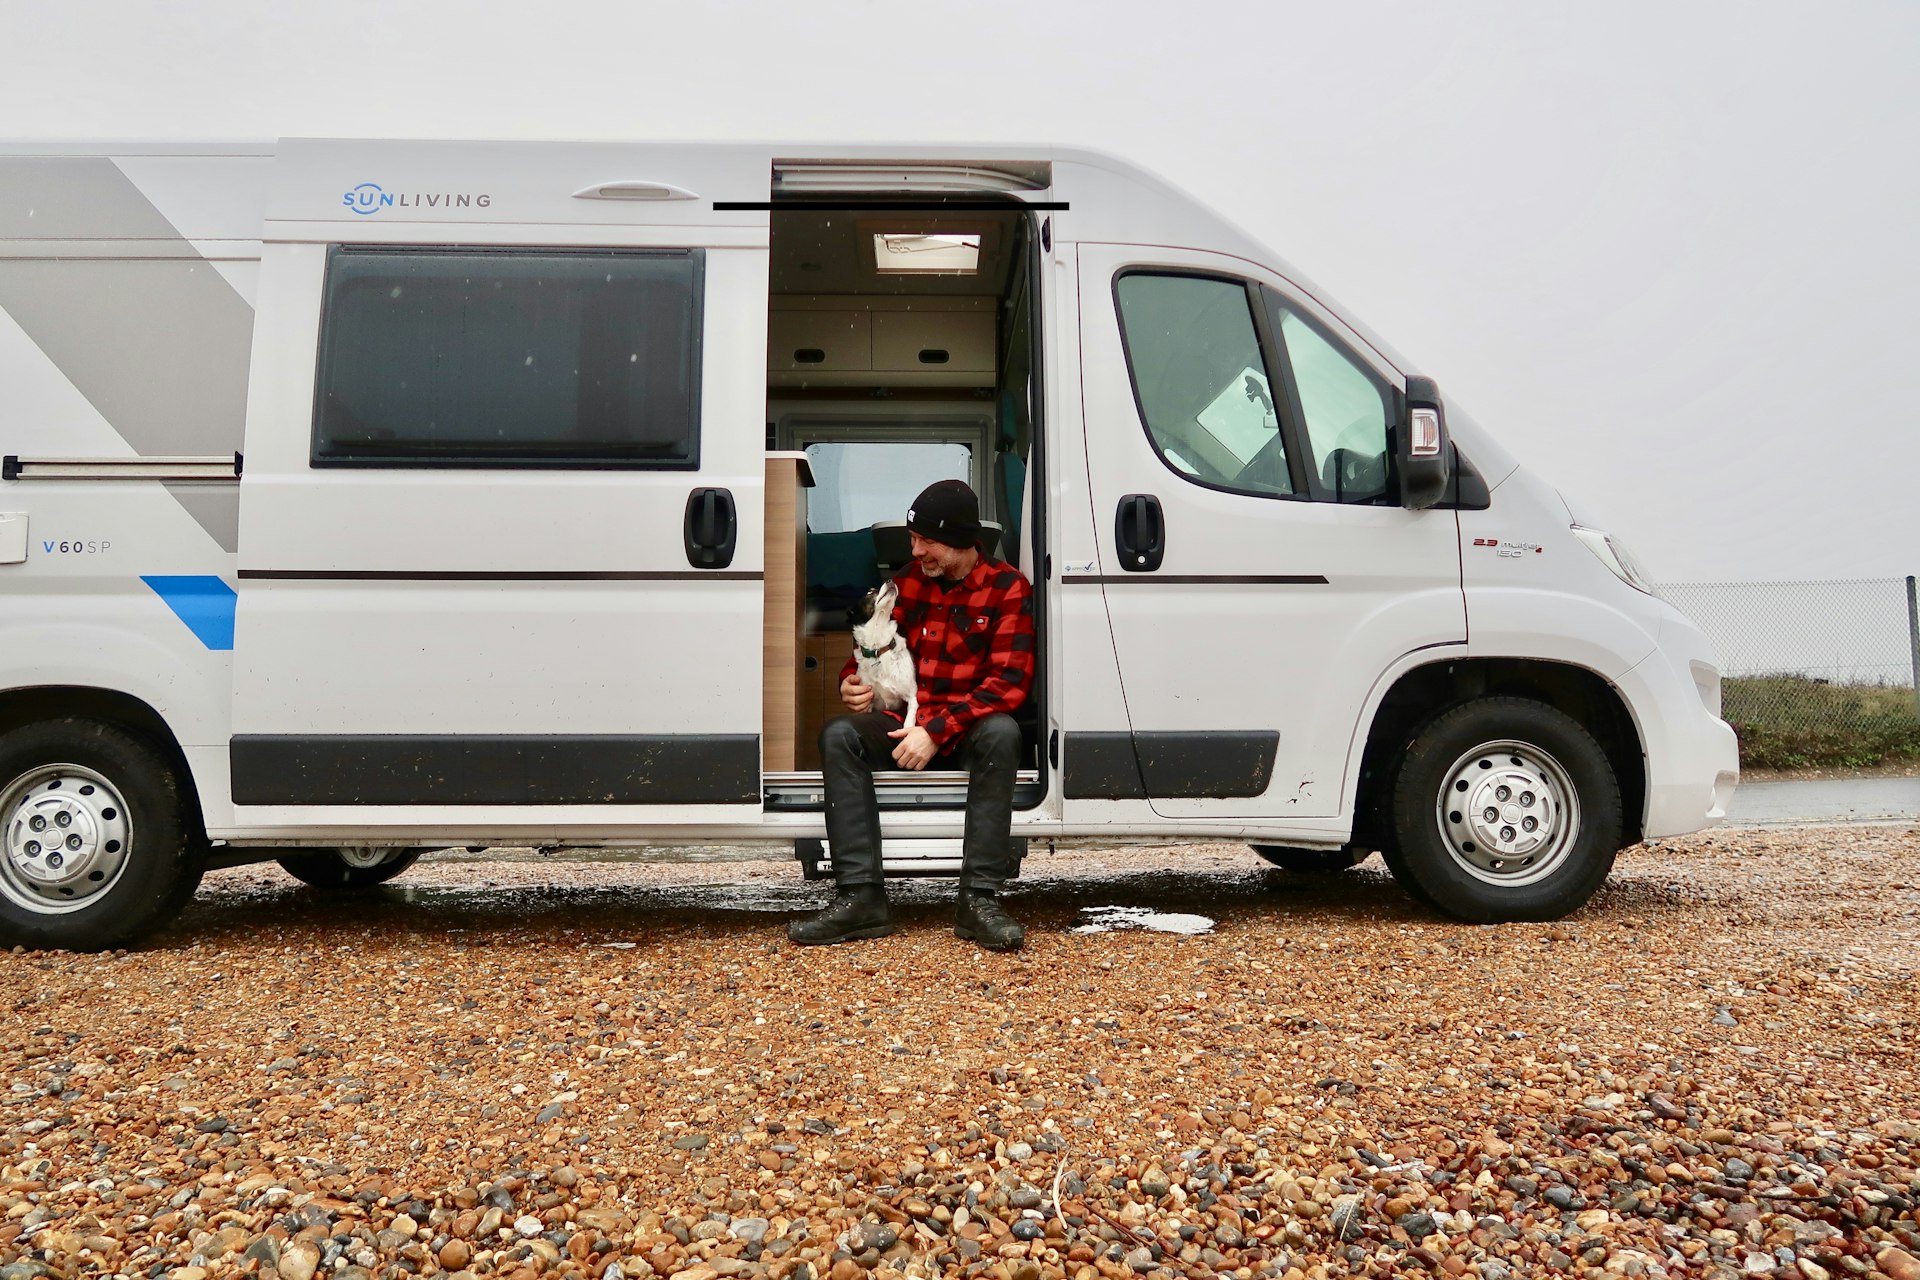 Author Andrew Ditton sits on the side of his van with his black and white dog. The white van is parked in a rural location.